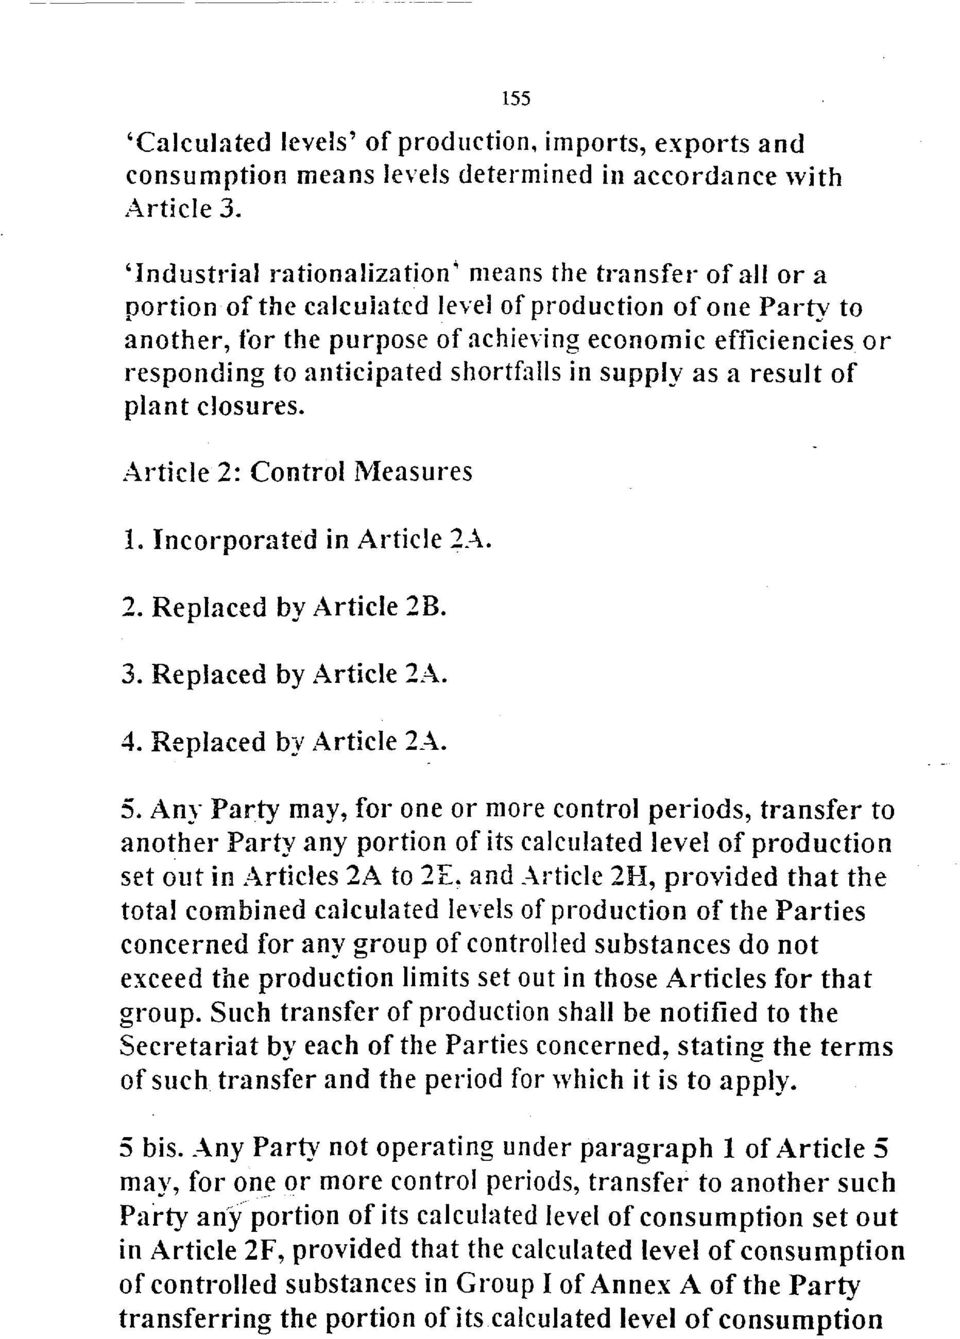 anticipated shortfalls in supply as a result of plant closures. Article 2: Control Measures 1. Incorporated in Article 2A. 2. Replaced by Article 2B. 3. Replaced by Article 2A. 4.